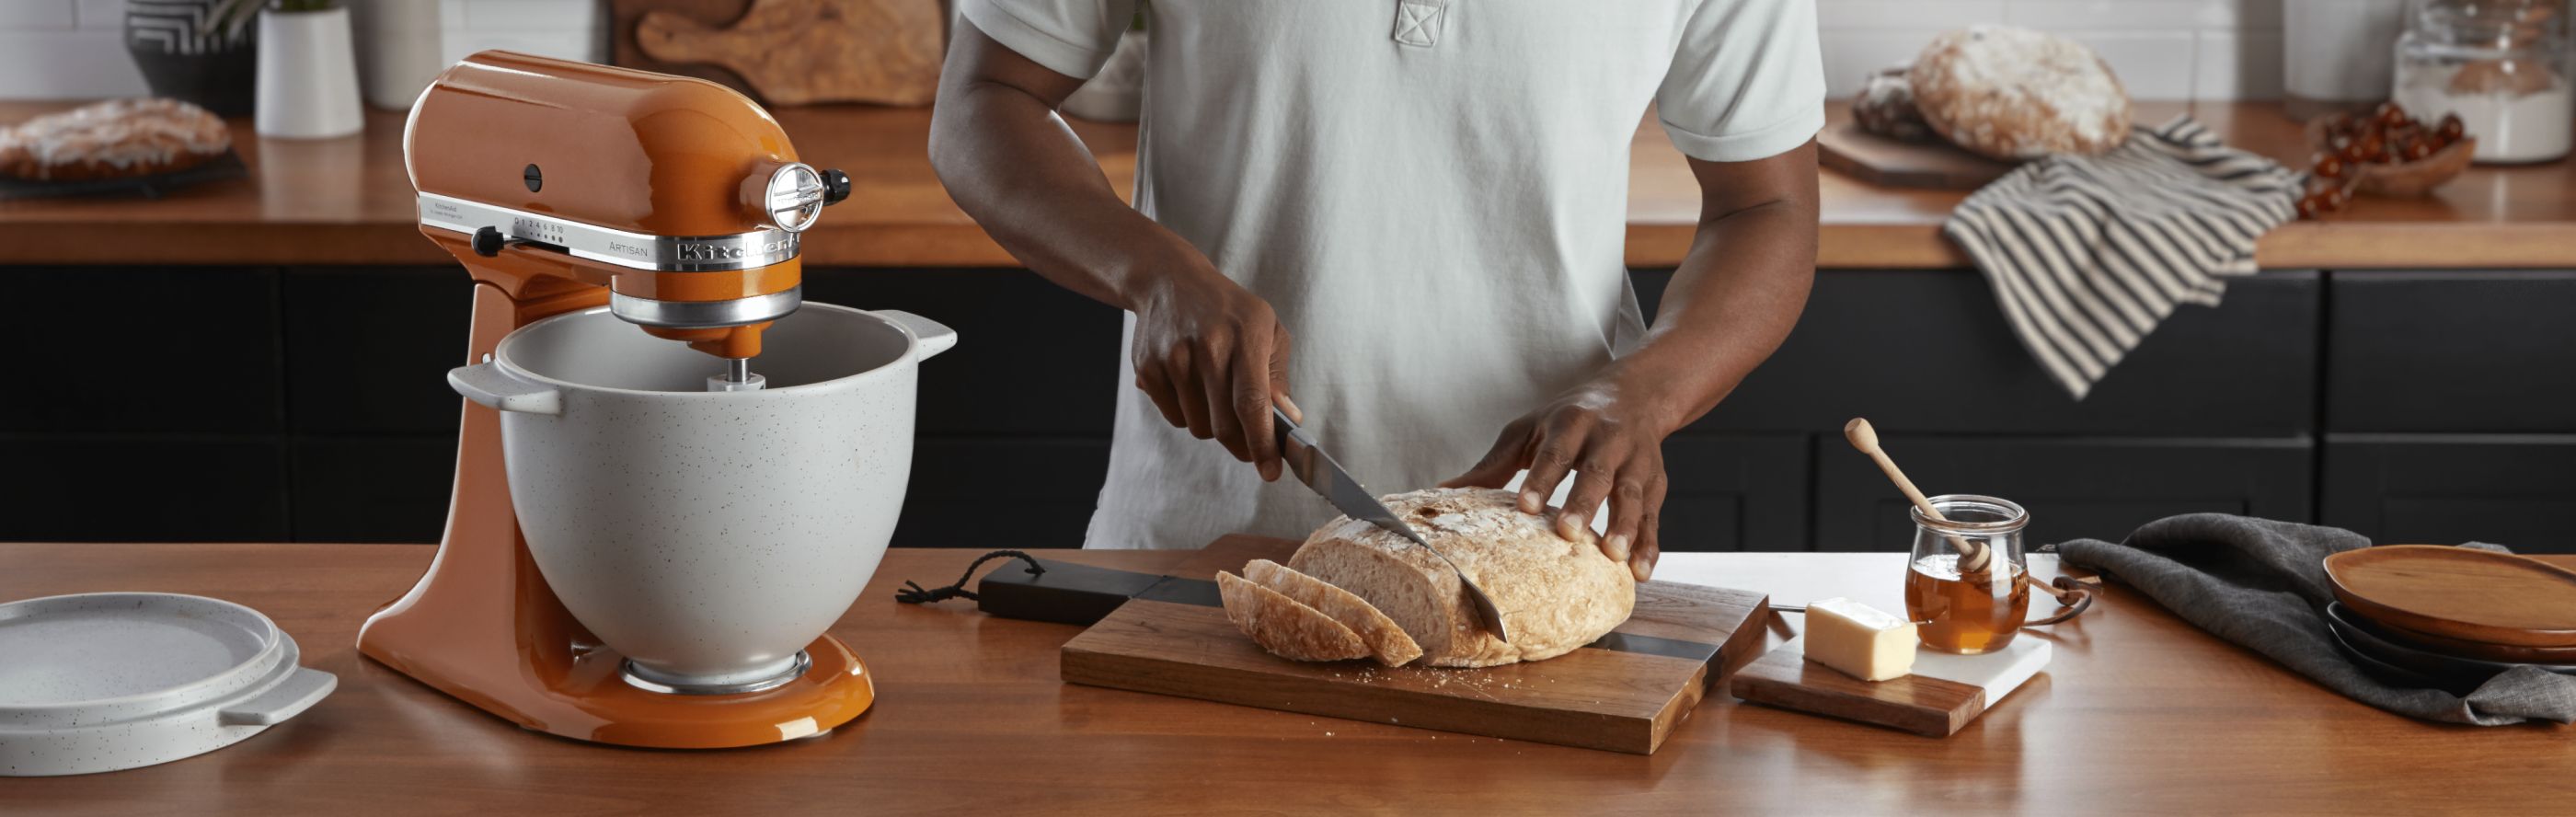 Man slicing fresh bread on countertop next to stand mixer